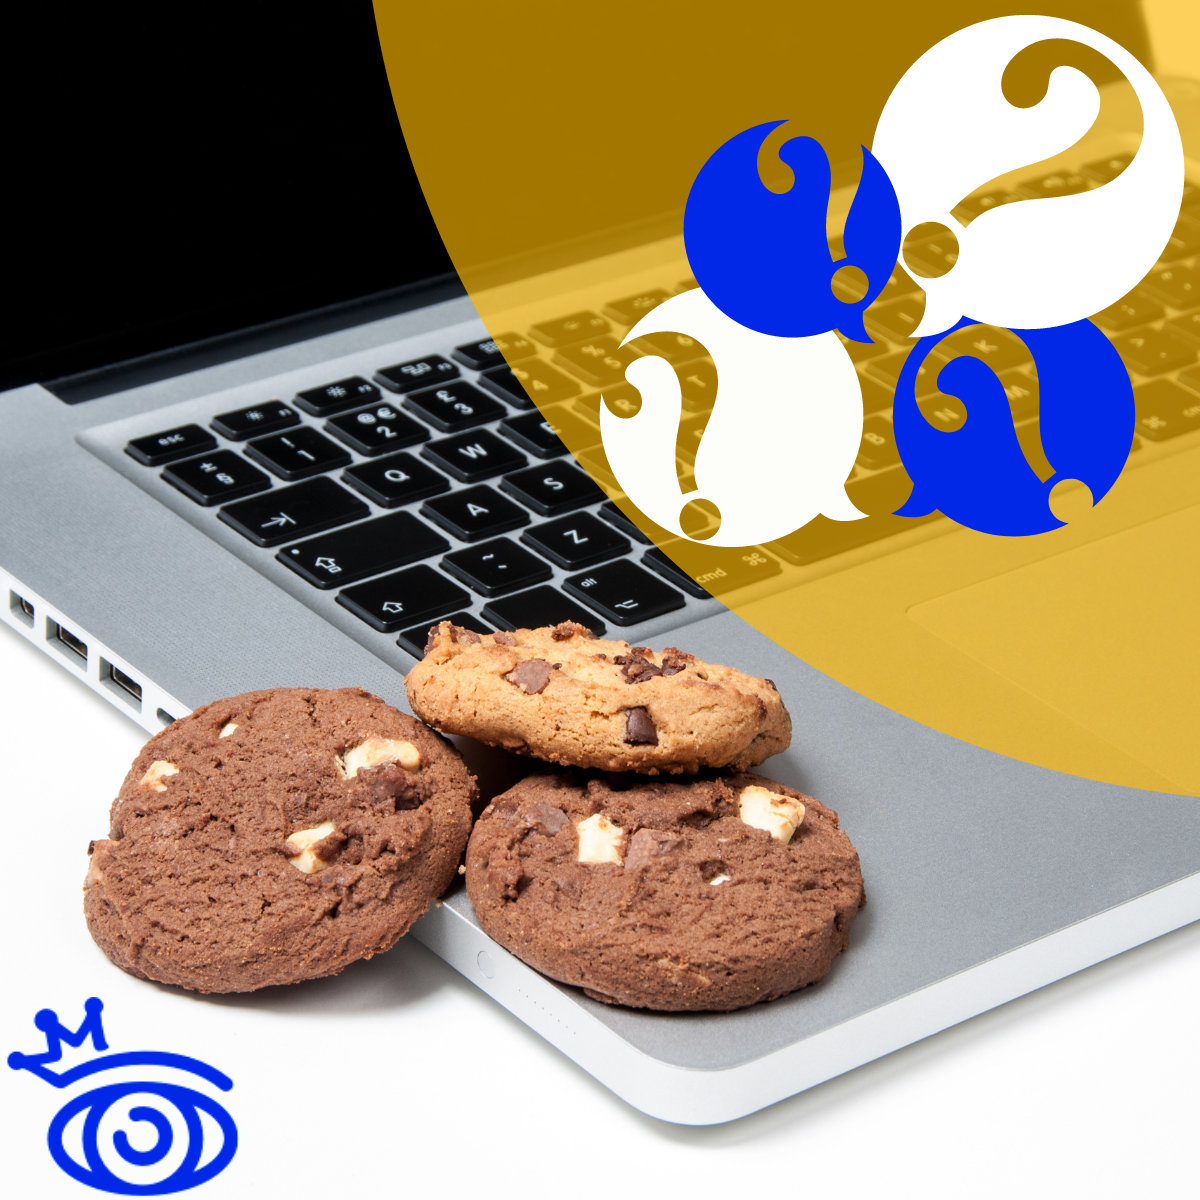 Your guide to manage cookies on your website